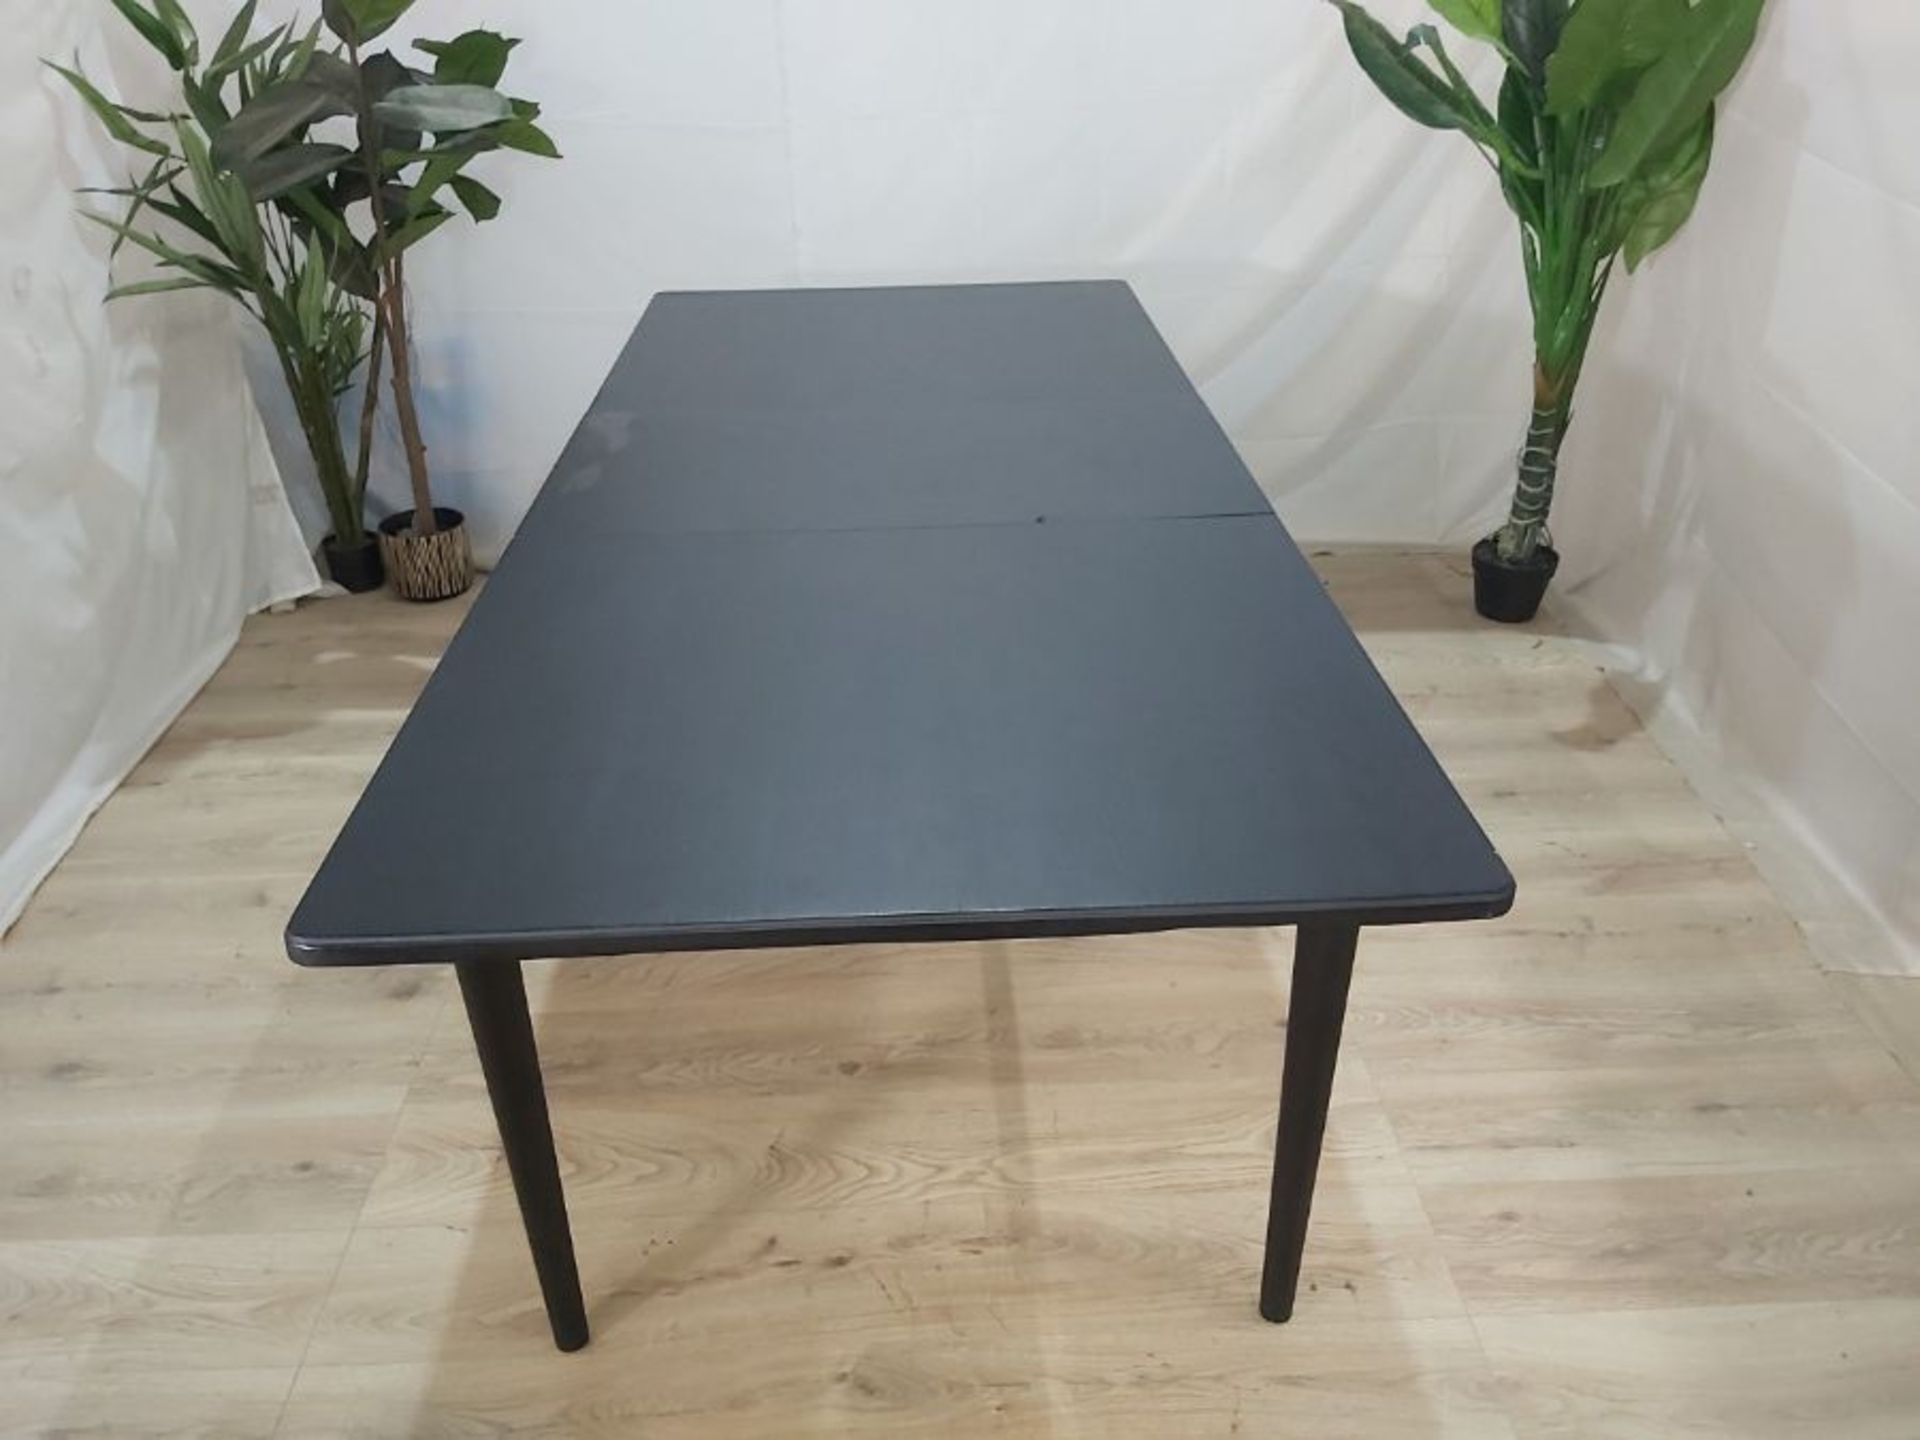 Swoon Reyna Extending Dining Table in Charcoal and Brass RRP ?599 Swoon Reyna Extending Dining Table - Image 2 of 7